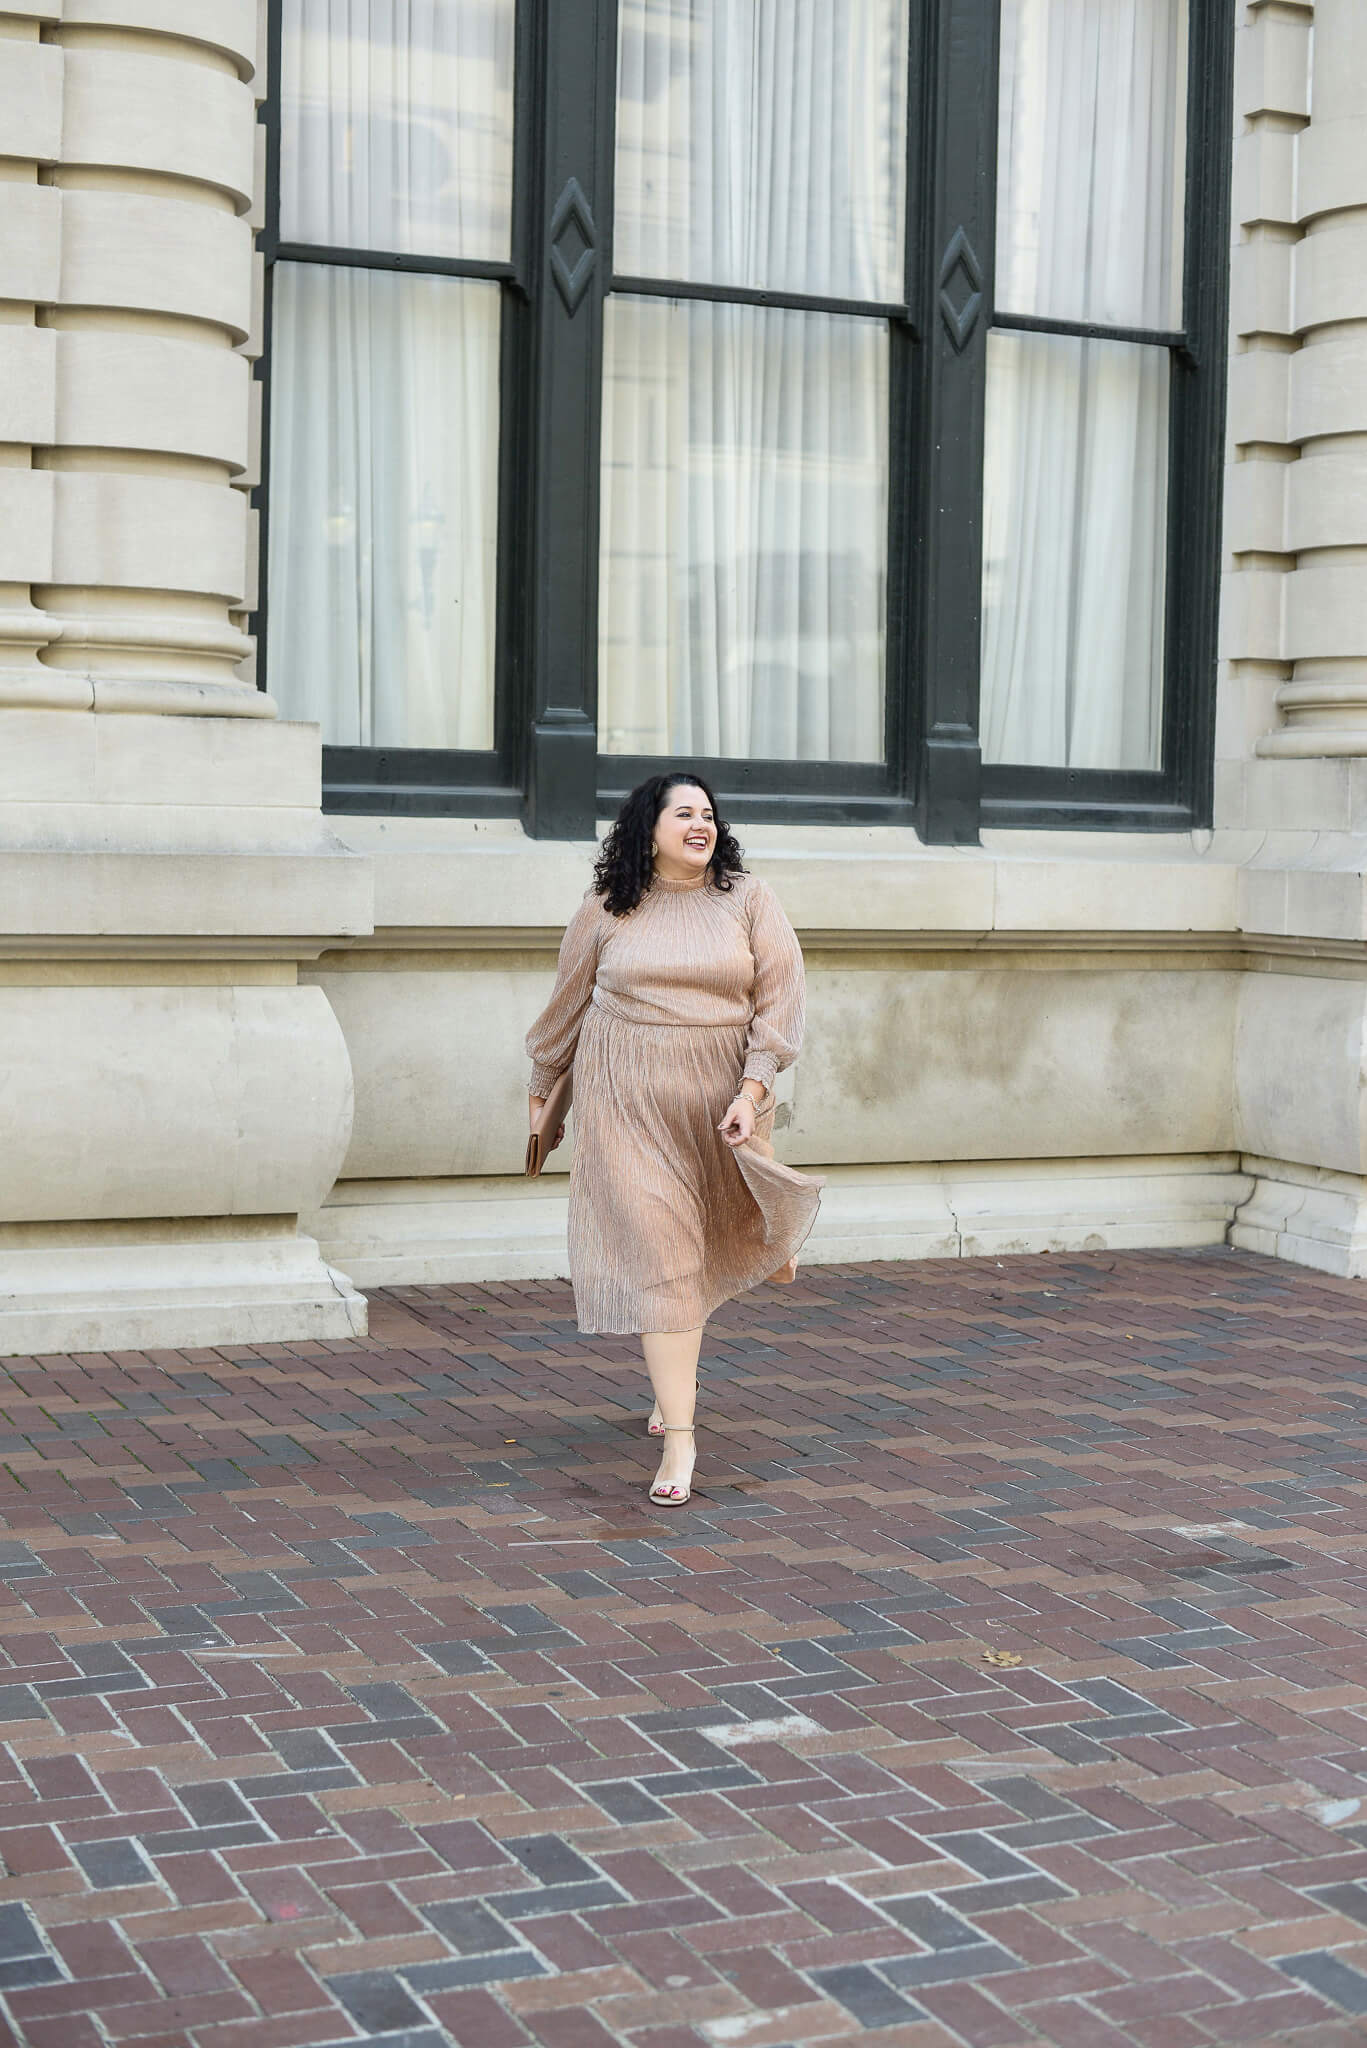 I'm sharing 3 sparkly plus size new years eve party outfit ideas on the blog today